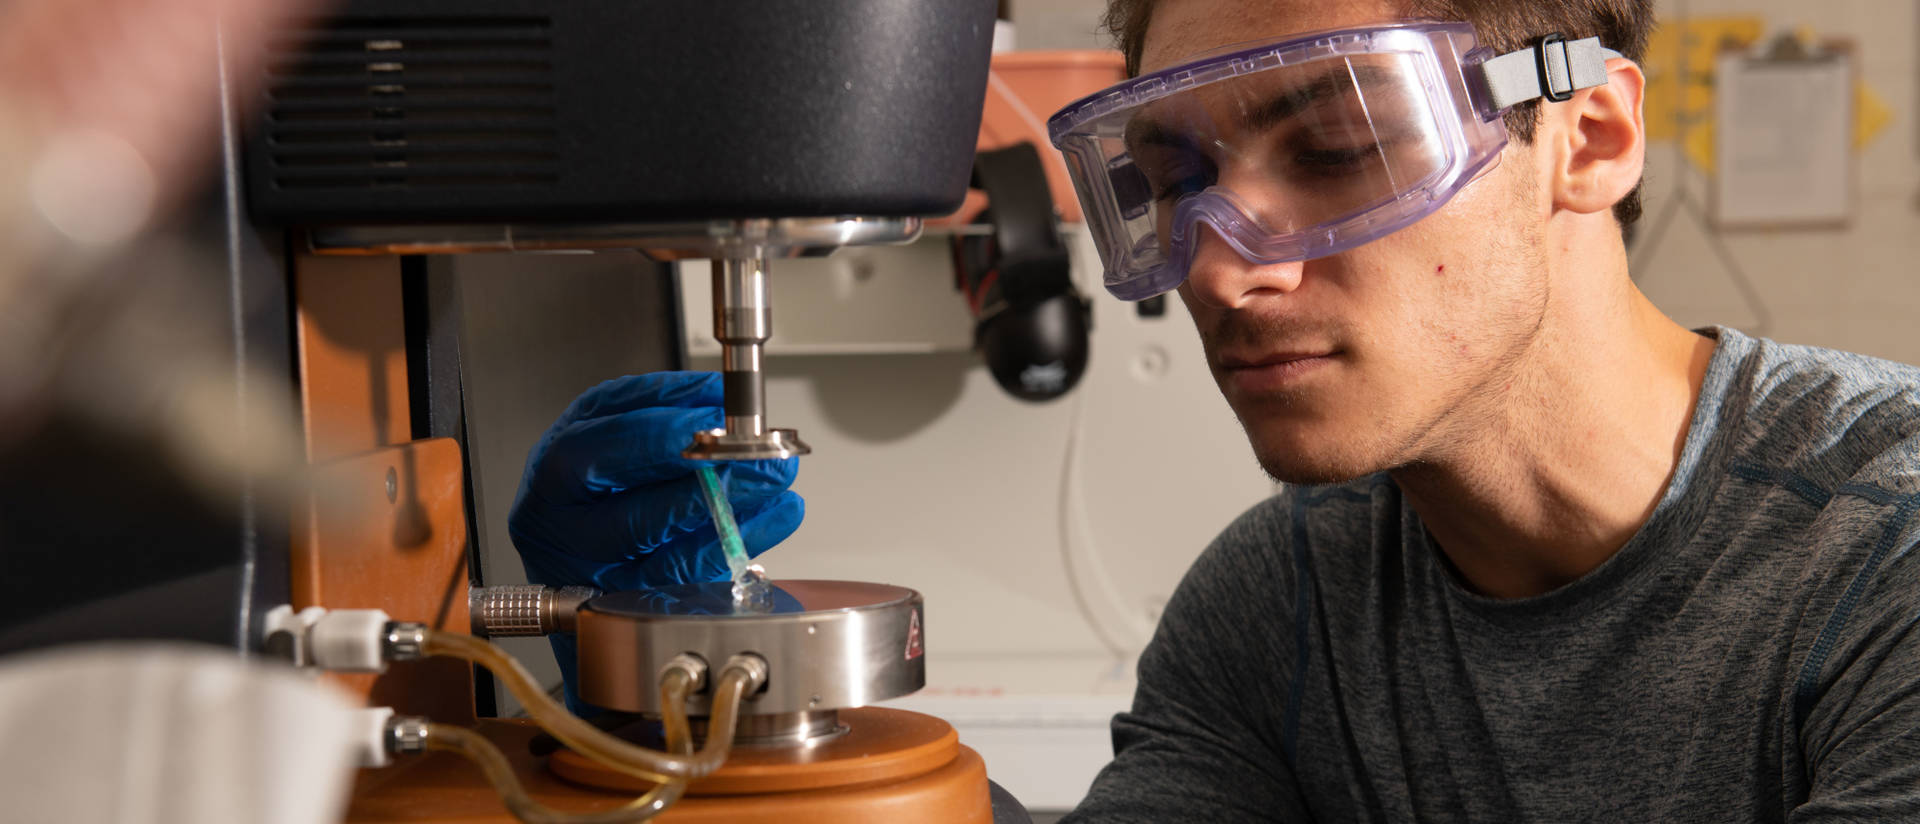 Materials science student working in a lab